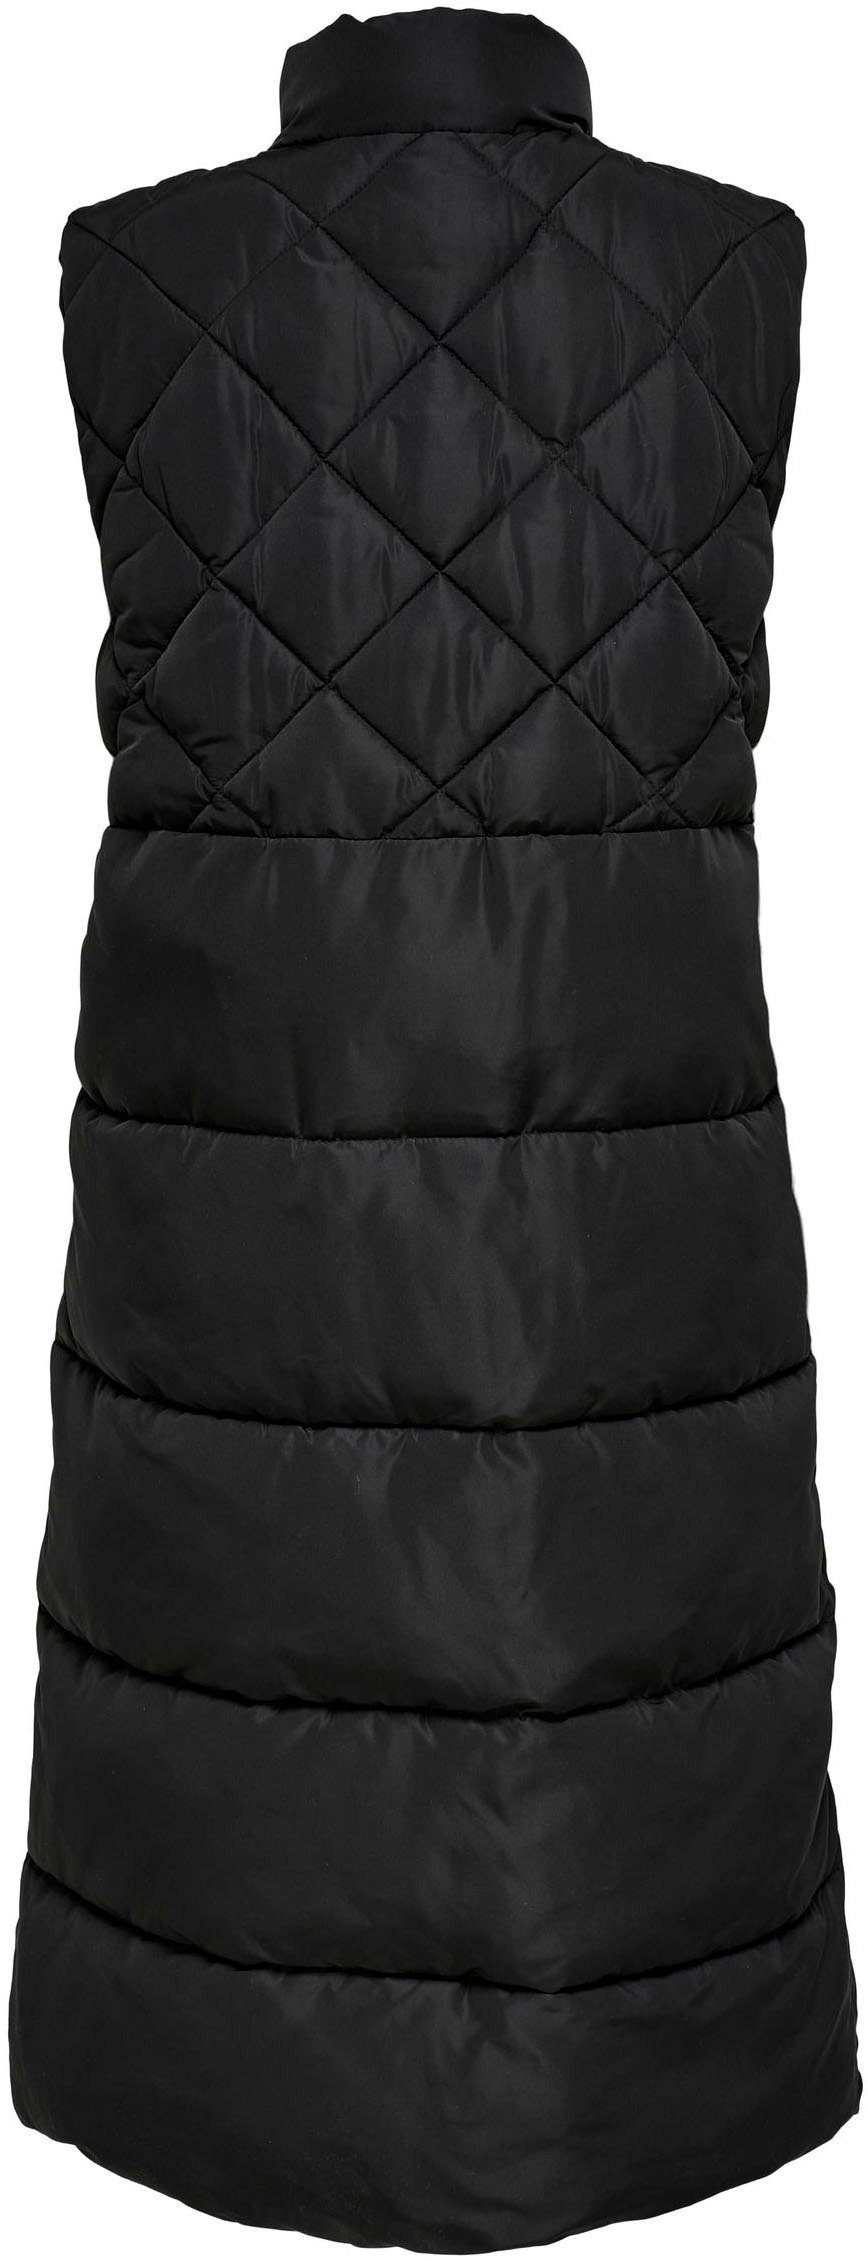 QUILTED WAISTCOAT black Steppweste ONLSTACY ONLY